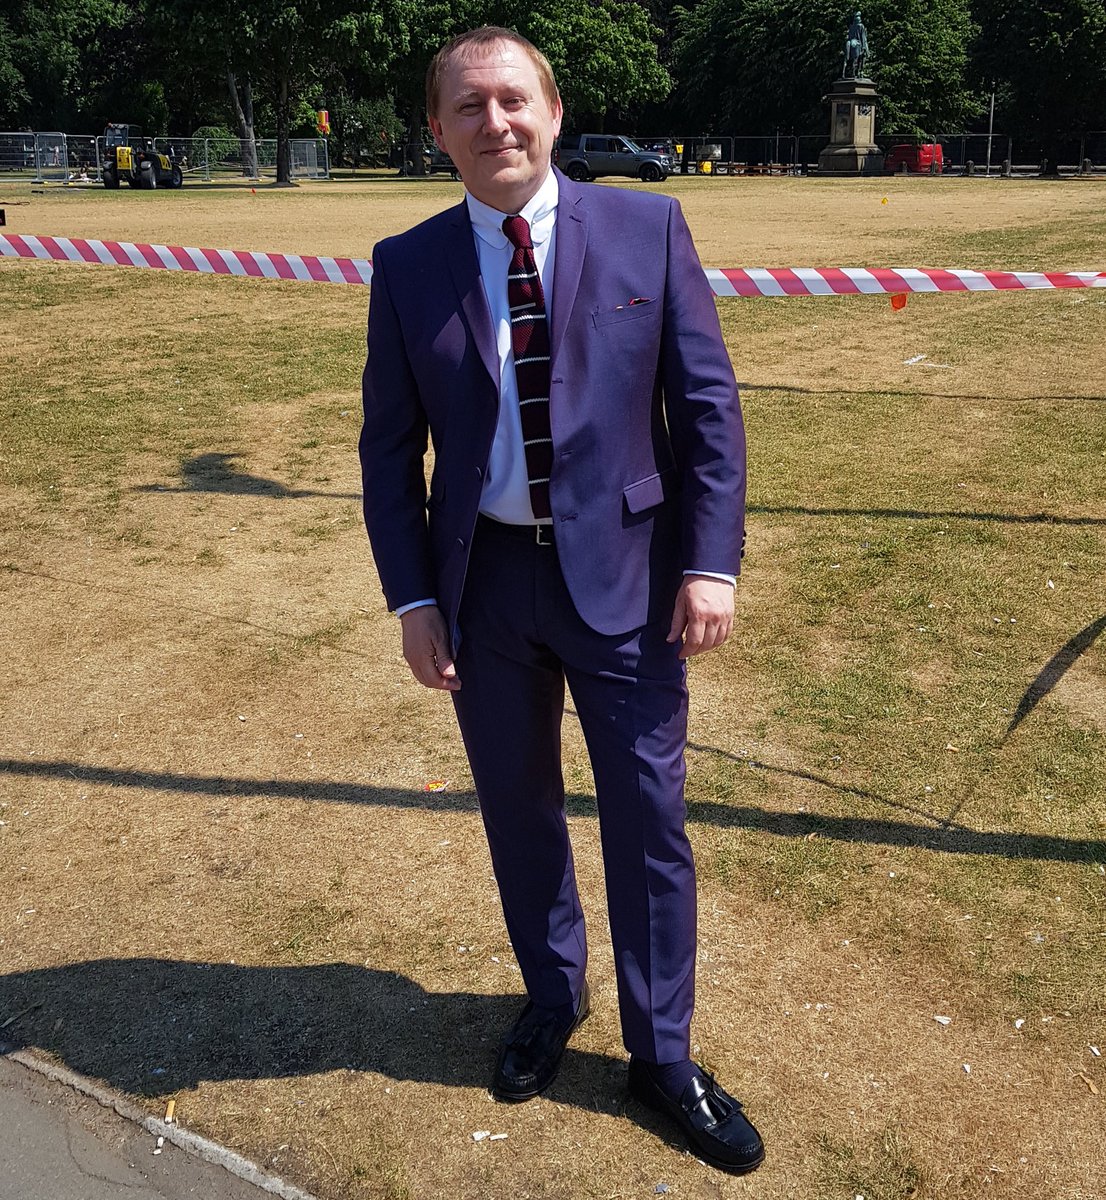 Summer Mod. Shoes by @GHBass1876 suit by @AdaptorClothing